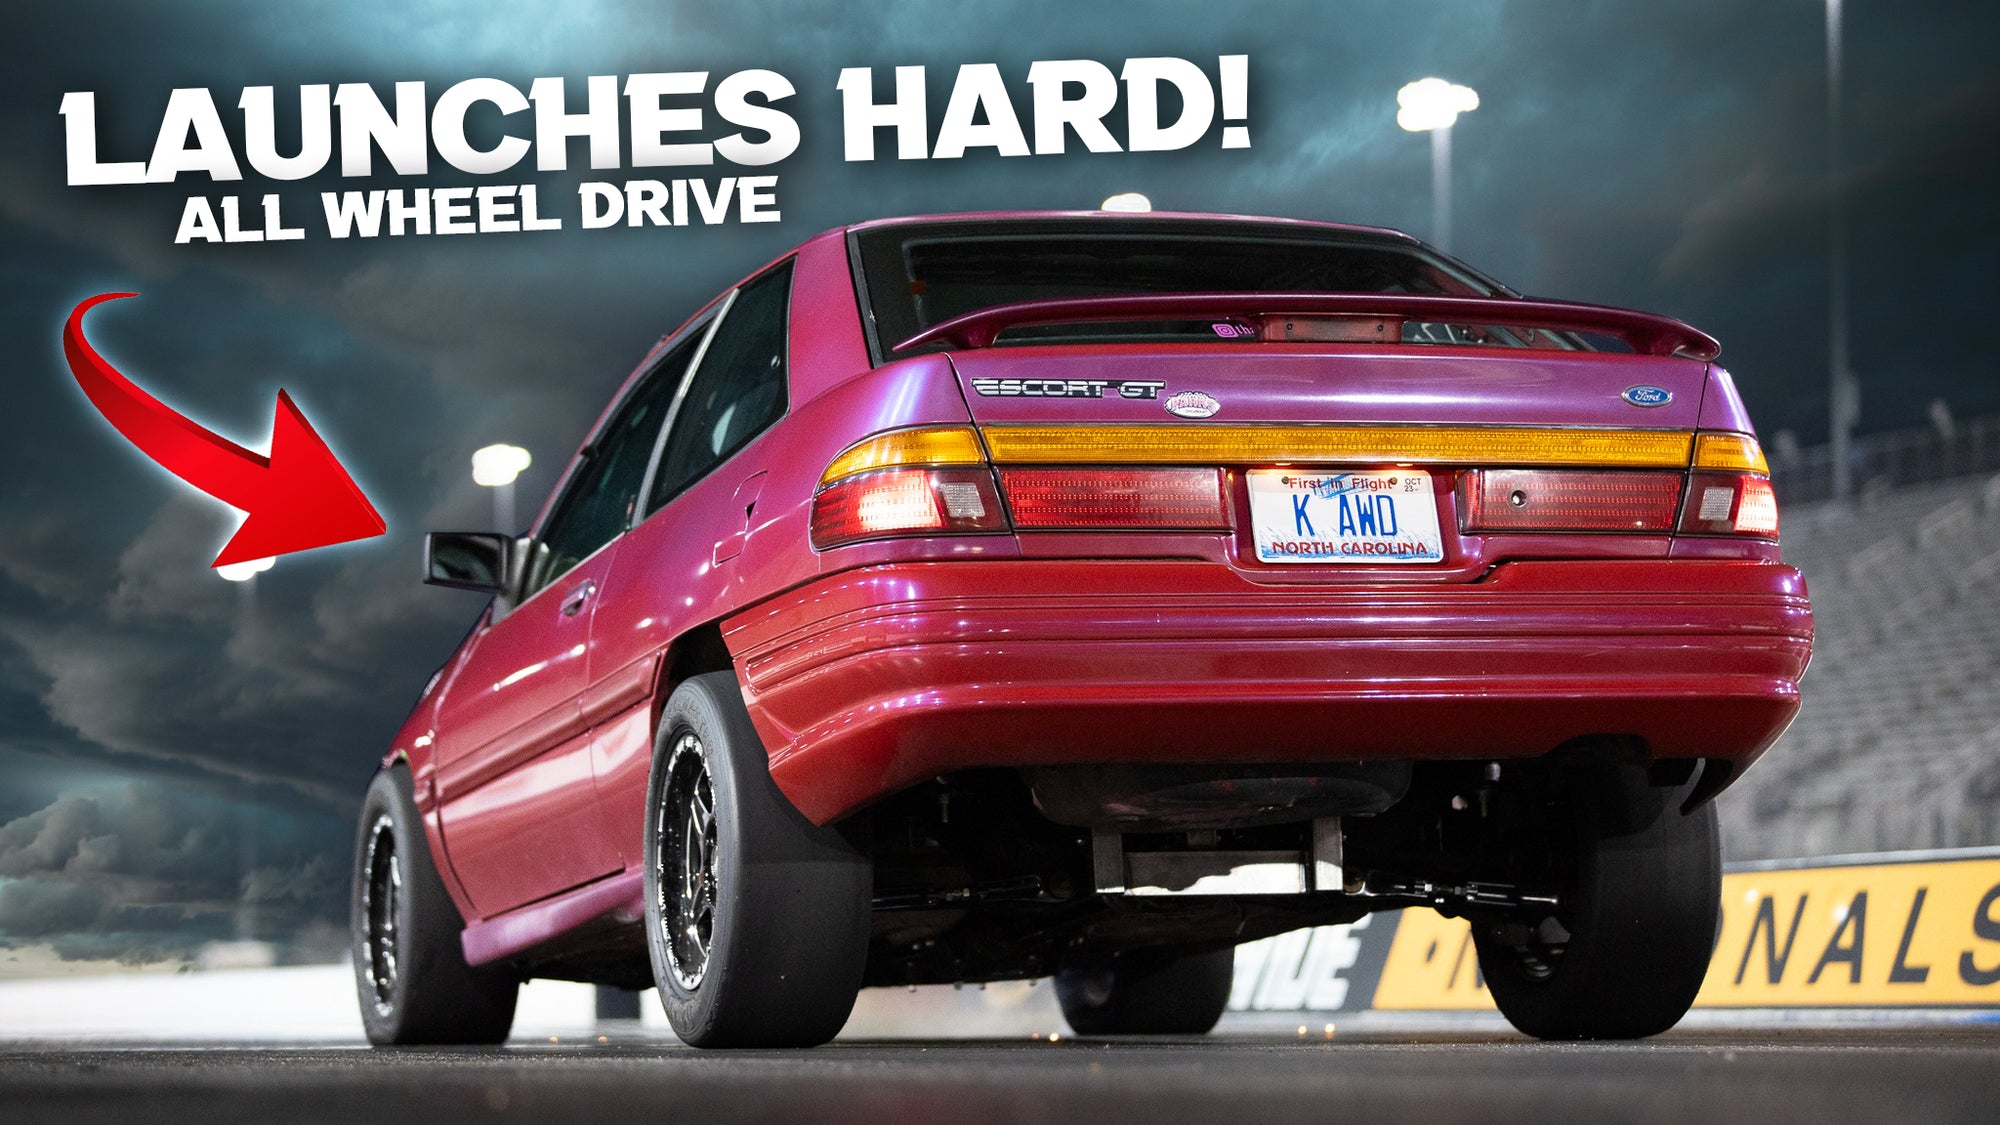 This Pink Ford Escort can GAP GTR's with EASE! (AWD K Series